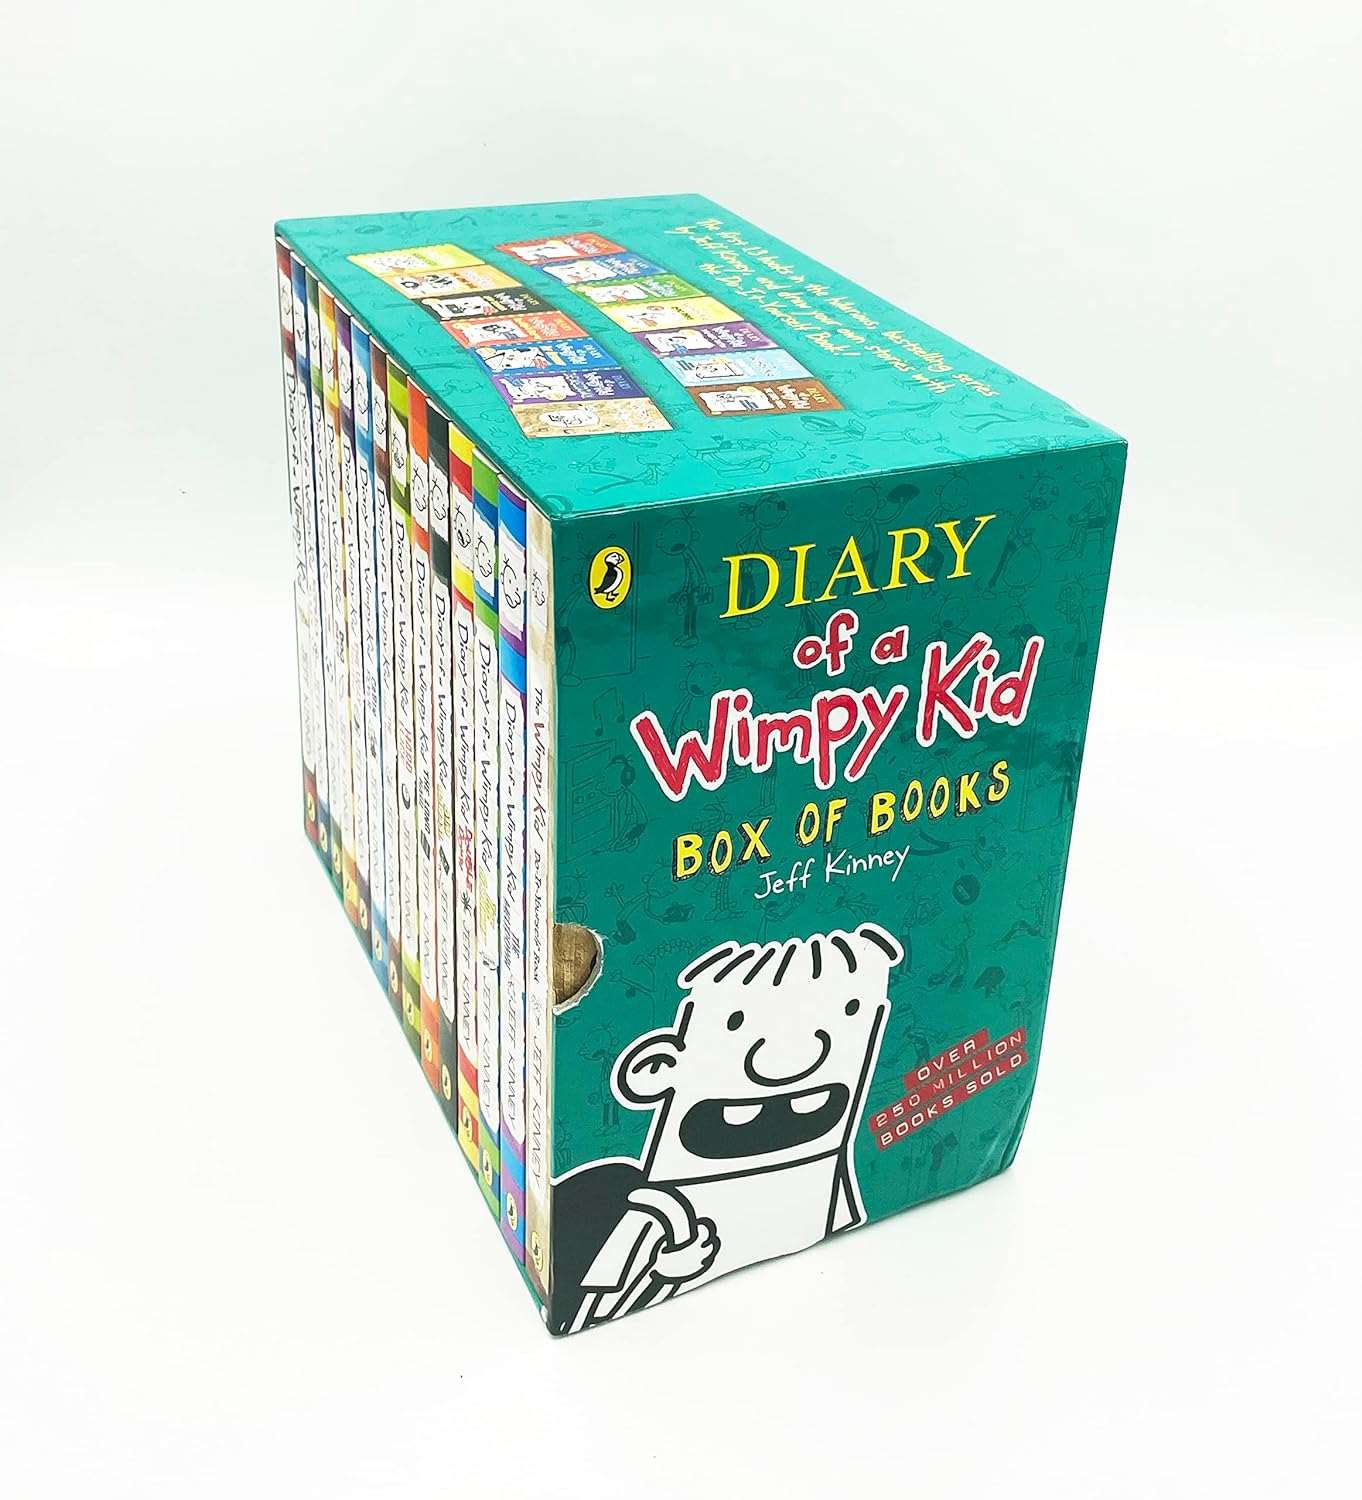 Diary of a Wimpy Kid 14 book Box Set - by Jeff Kinney